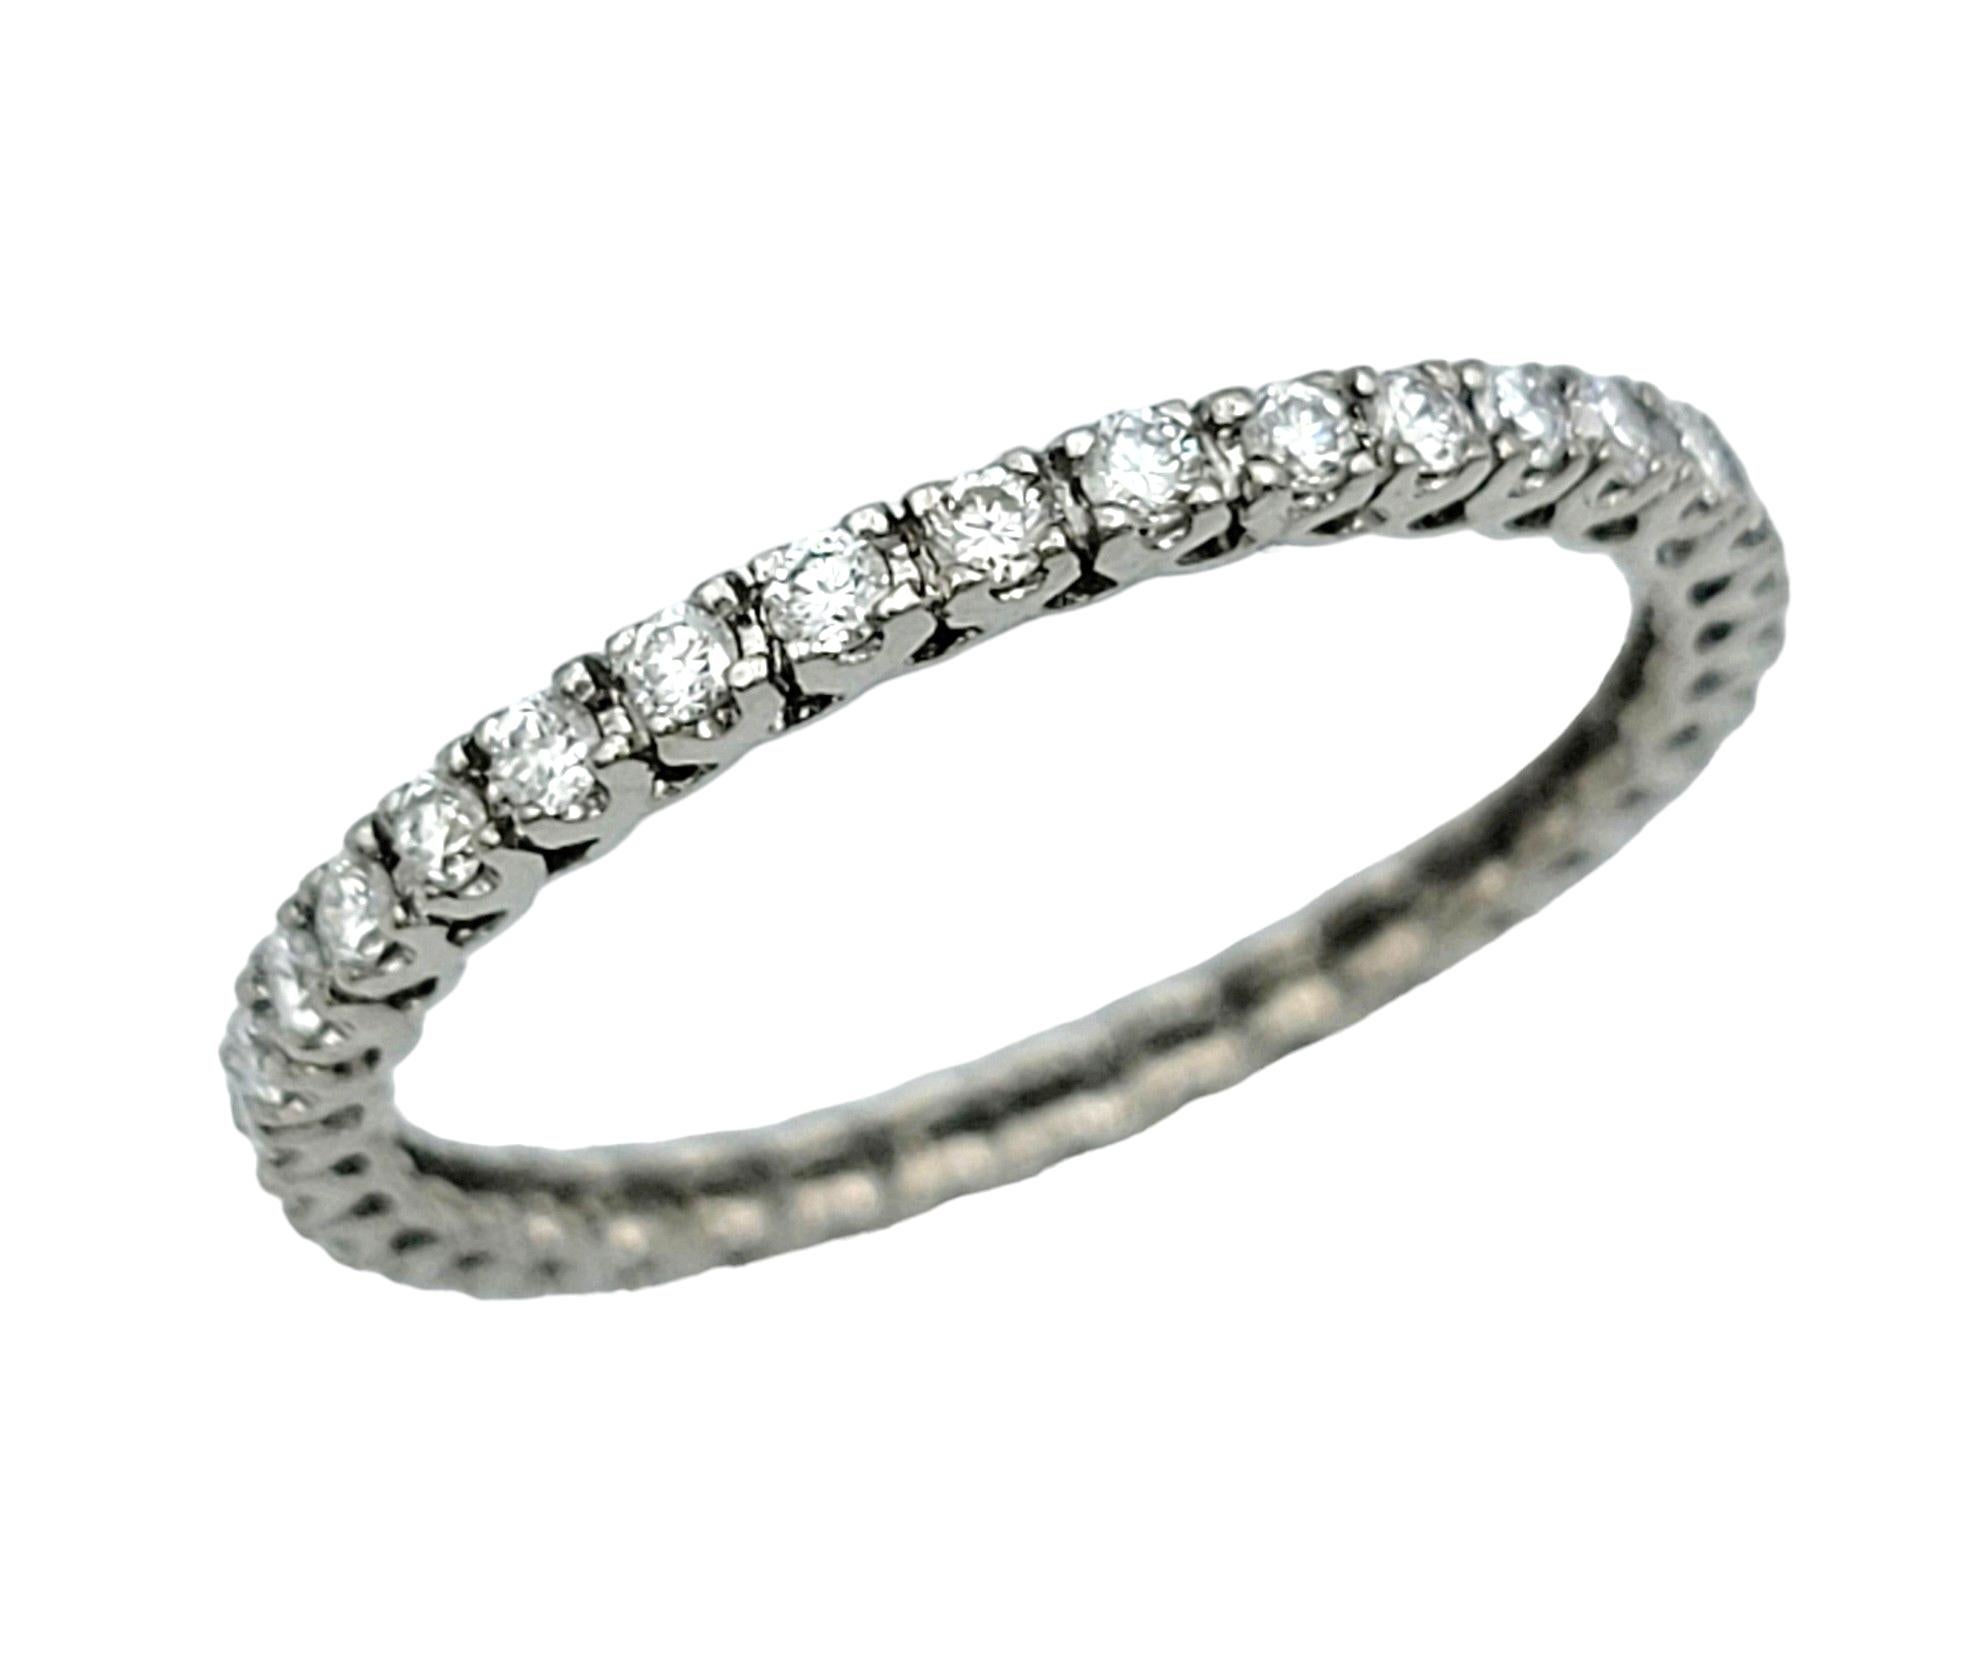 Ring Size: 6.25

This stunning eternity band ring features a single row of round diamonds set in delicate 18 karat white gold. The diamonds are meticulously arranged in a continuous circle, symbolizing eternal love and commitment.

With its sleek